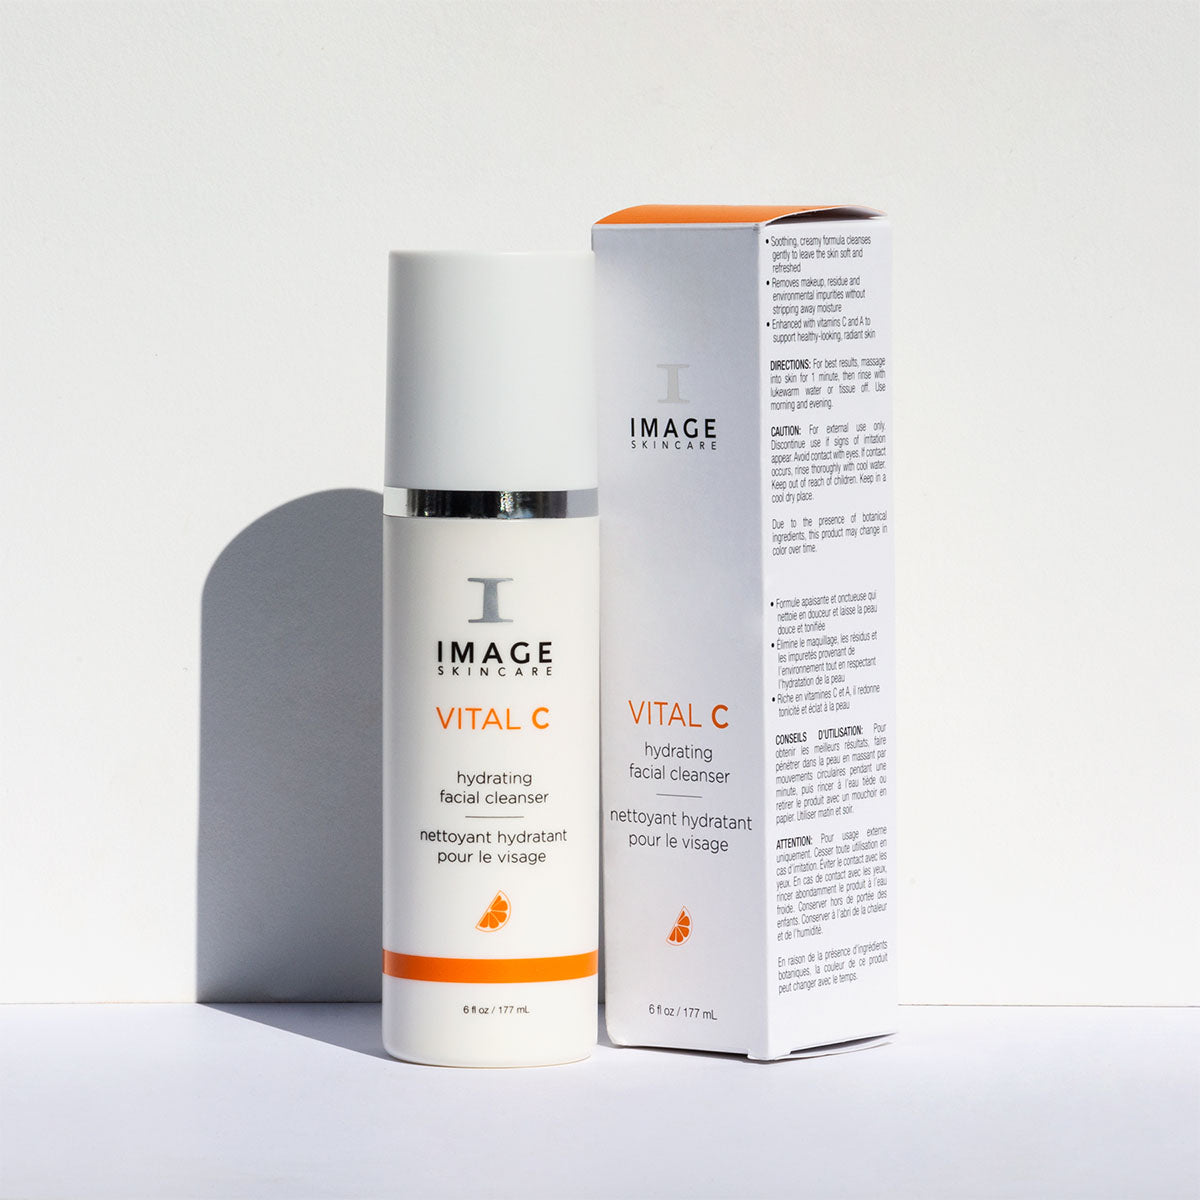 Image Skincare - VITAL C HYDRATING FACIAL CLEANSER 6oz